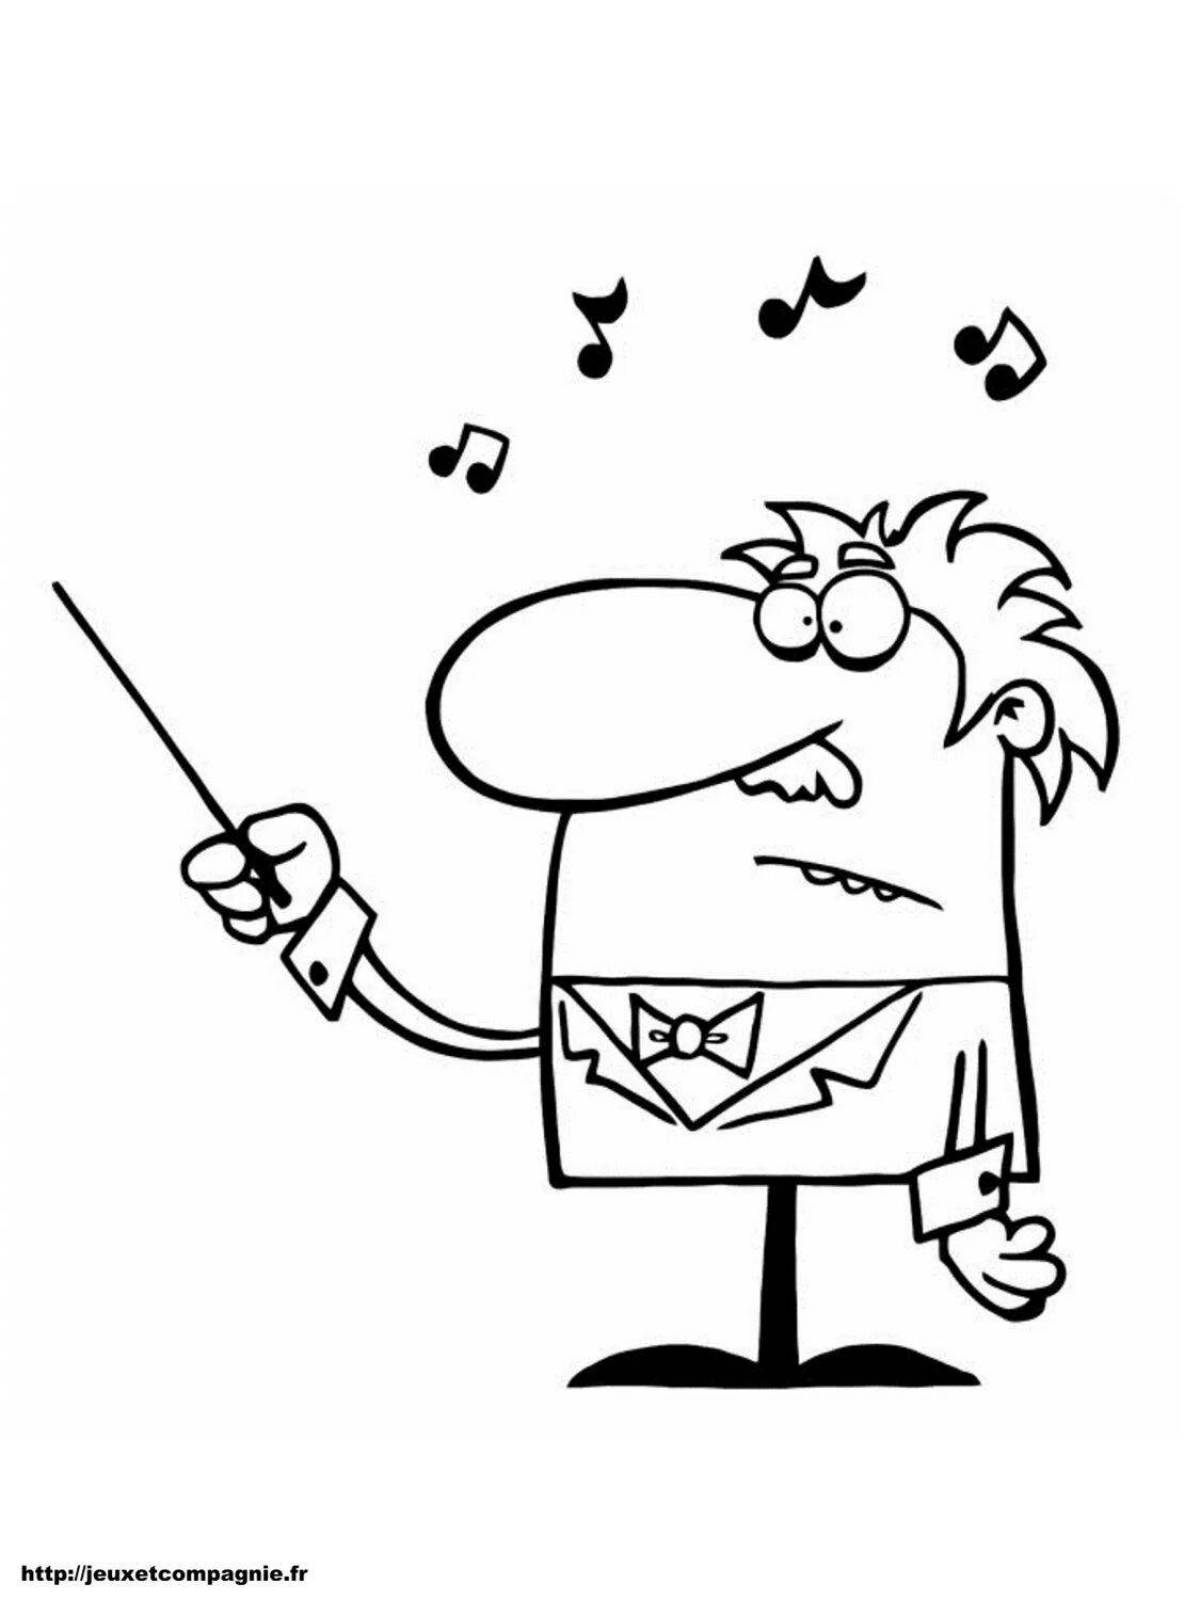 Coloring page charming conductor for the little ones